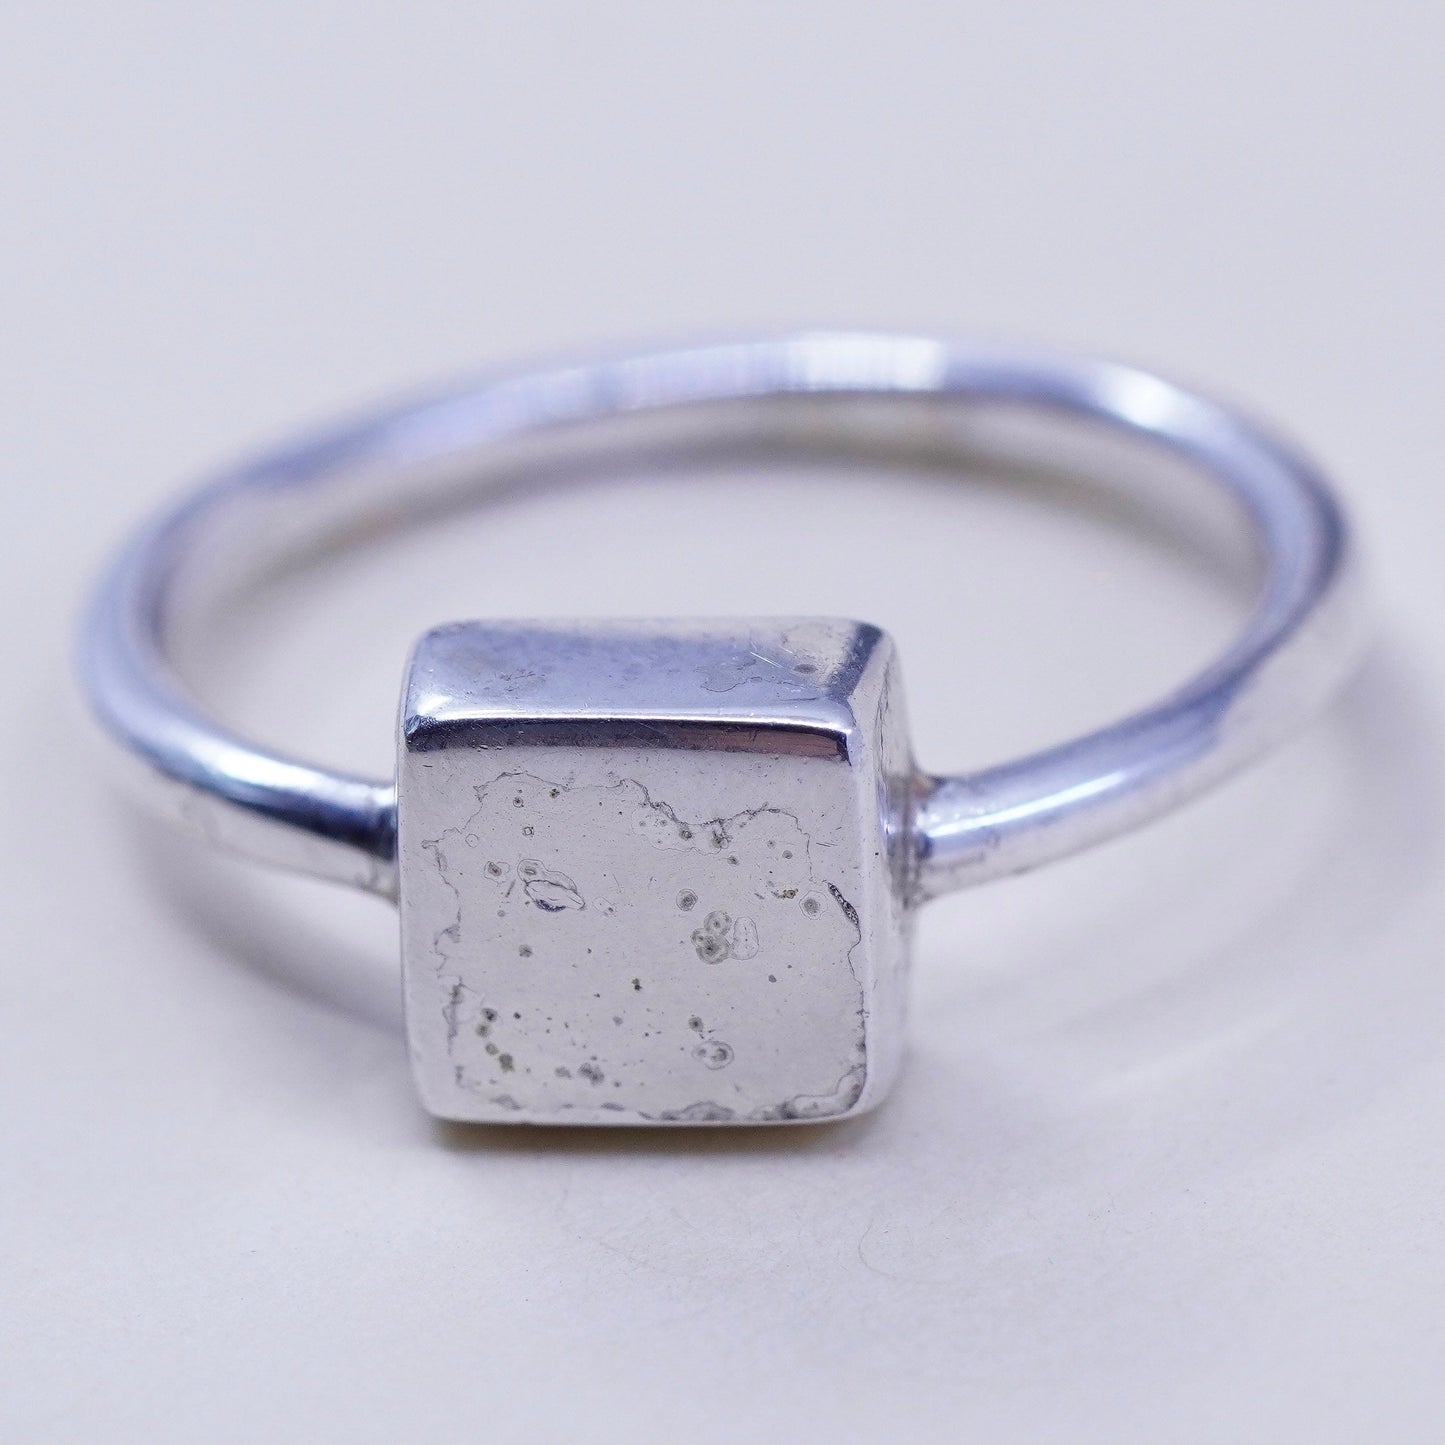 Size 8.5, vintage sterling 925 silver handmade ring with square